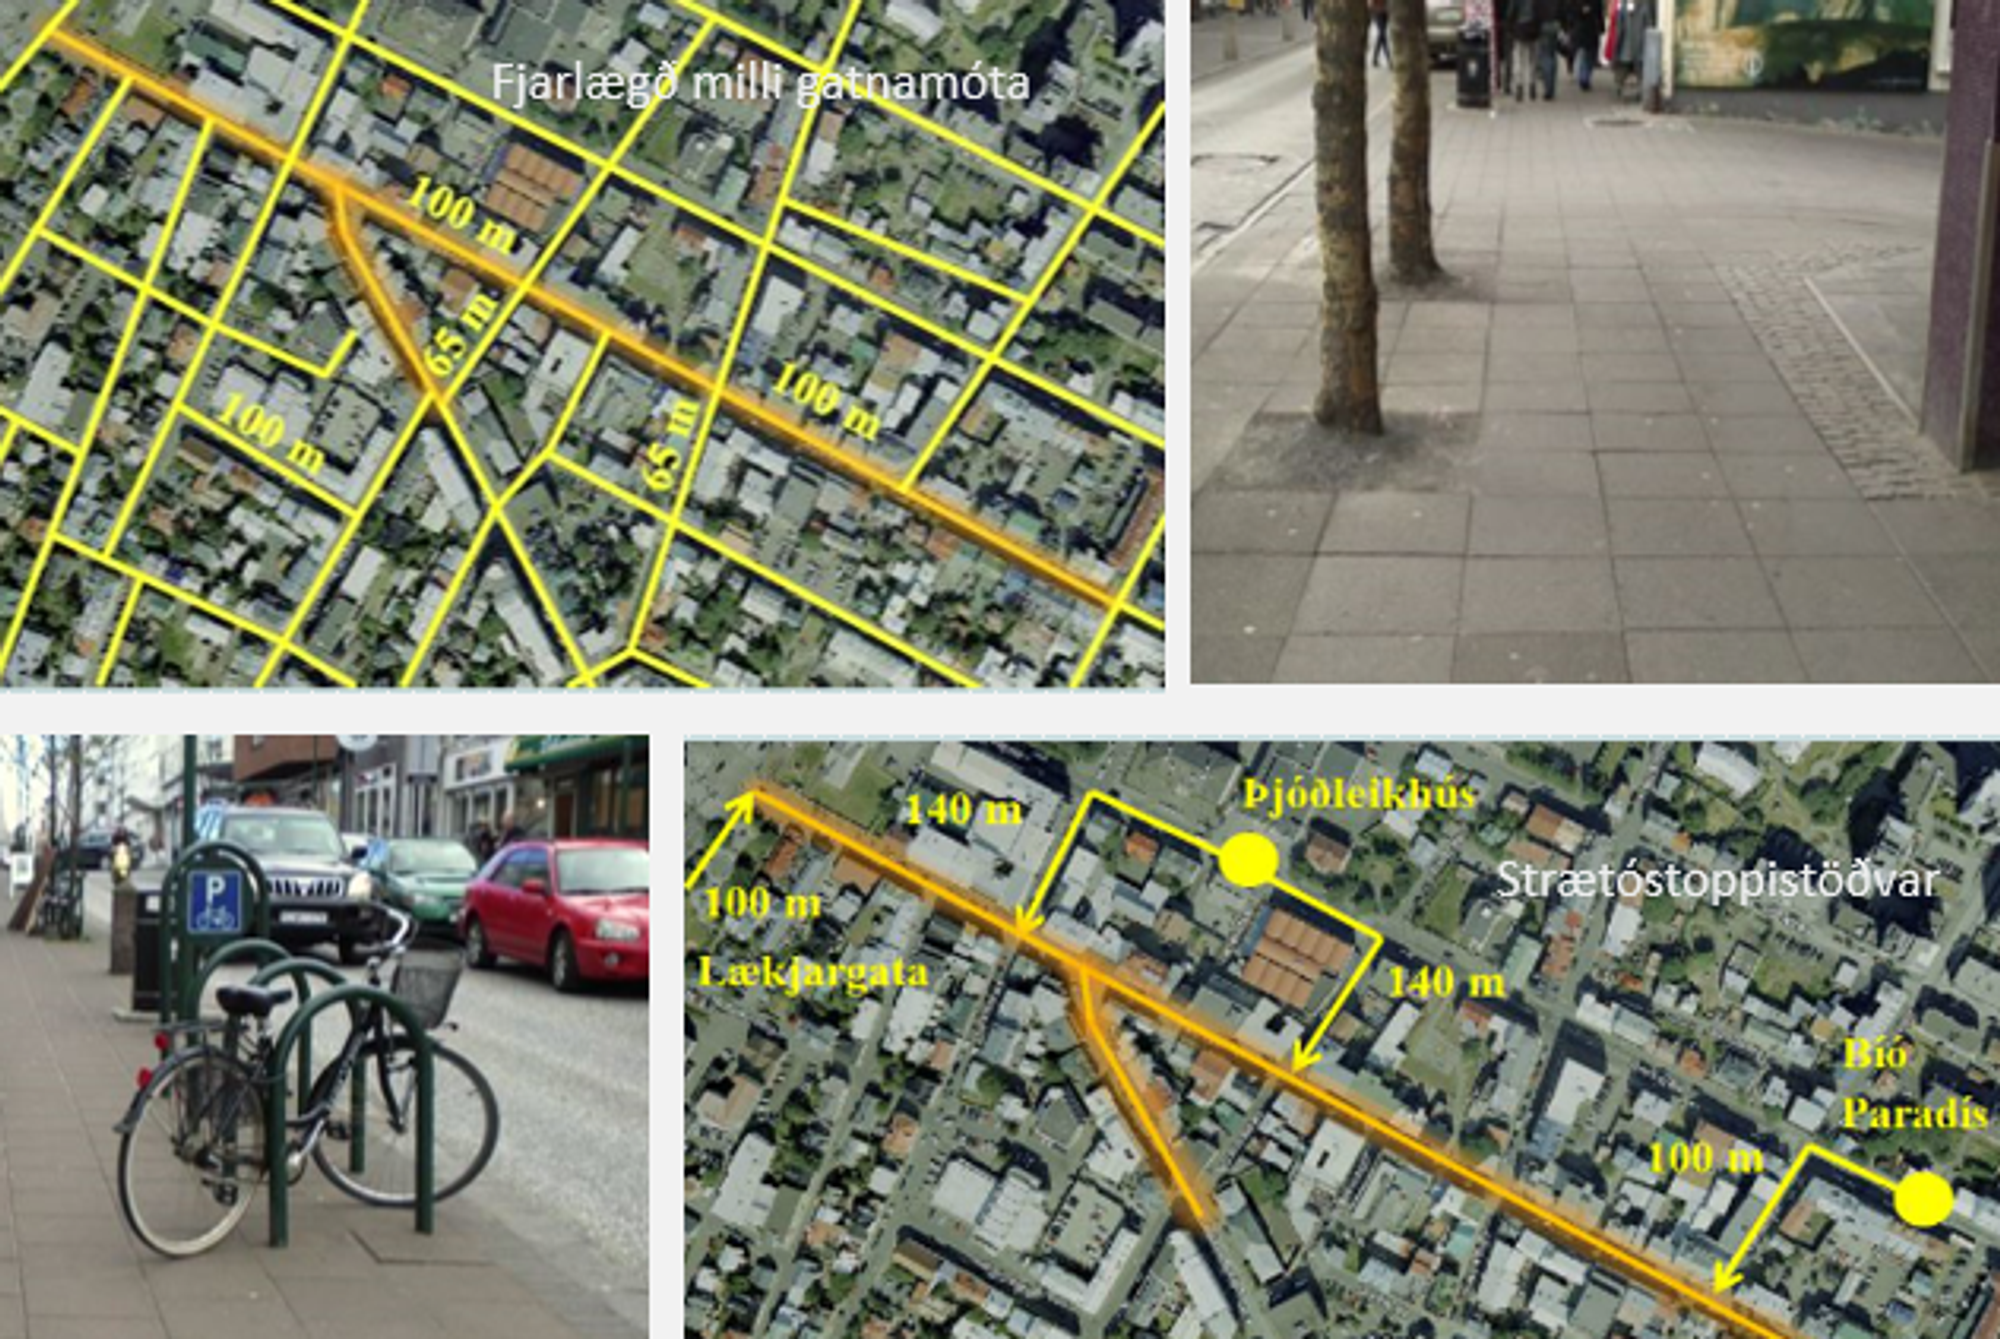 Image is consist of two maps with marked areas and two pictures showing pedestrian pathways and parked cycle